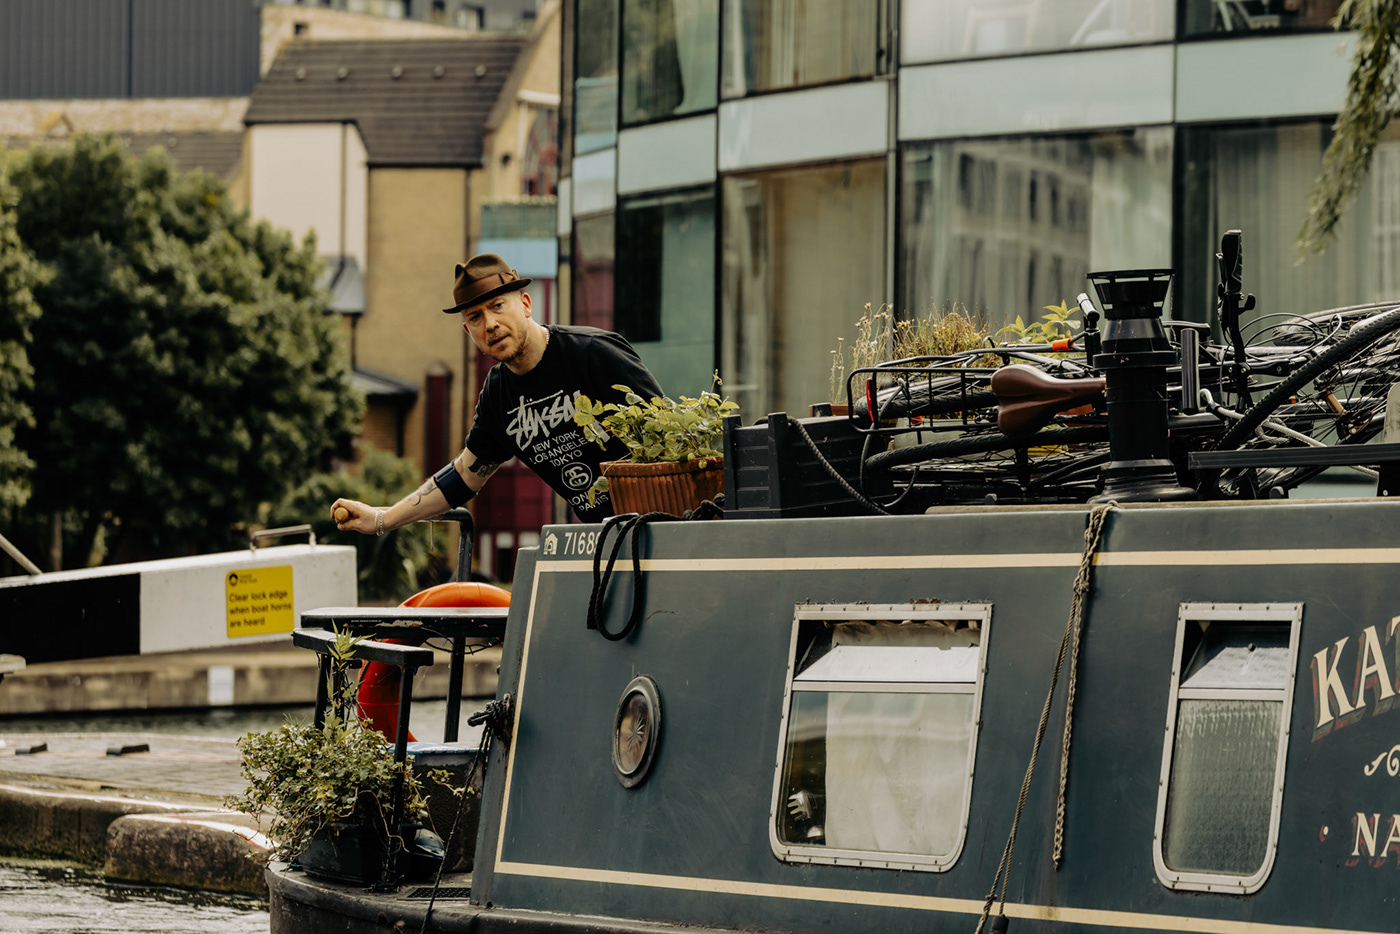 Shane Aurousseau Photography  photographer portrait London travel photography people canals narrowboat Waterways & Canals